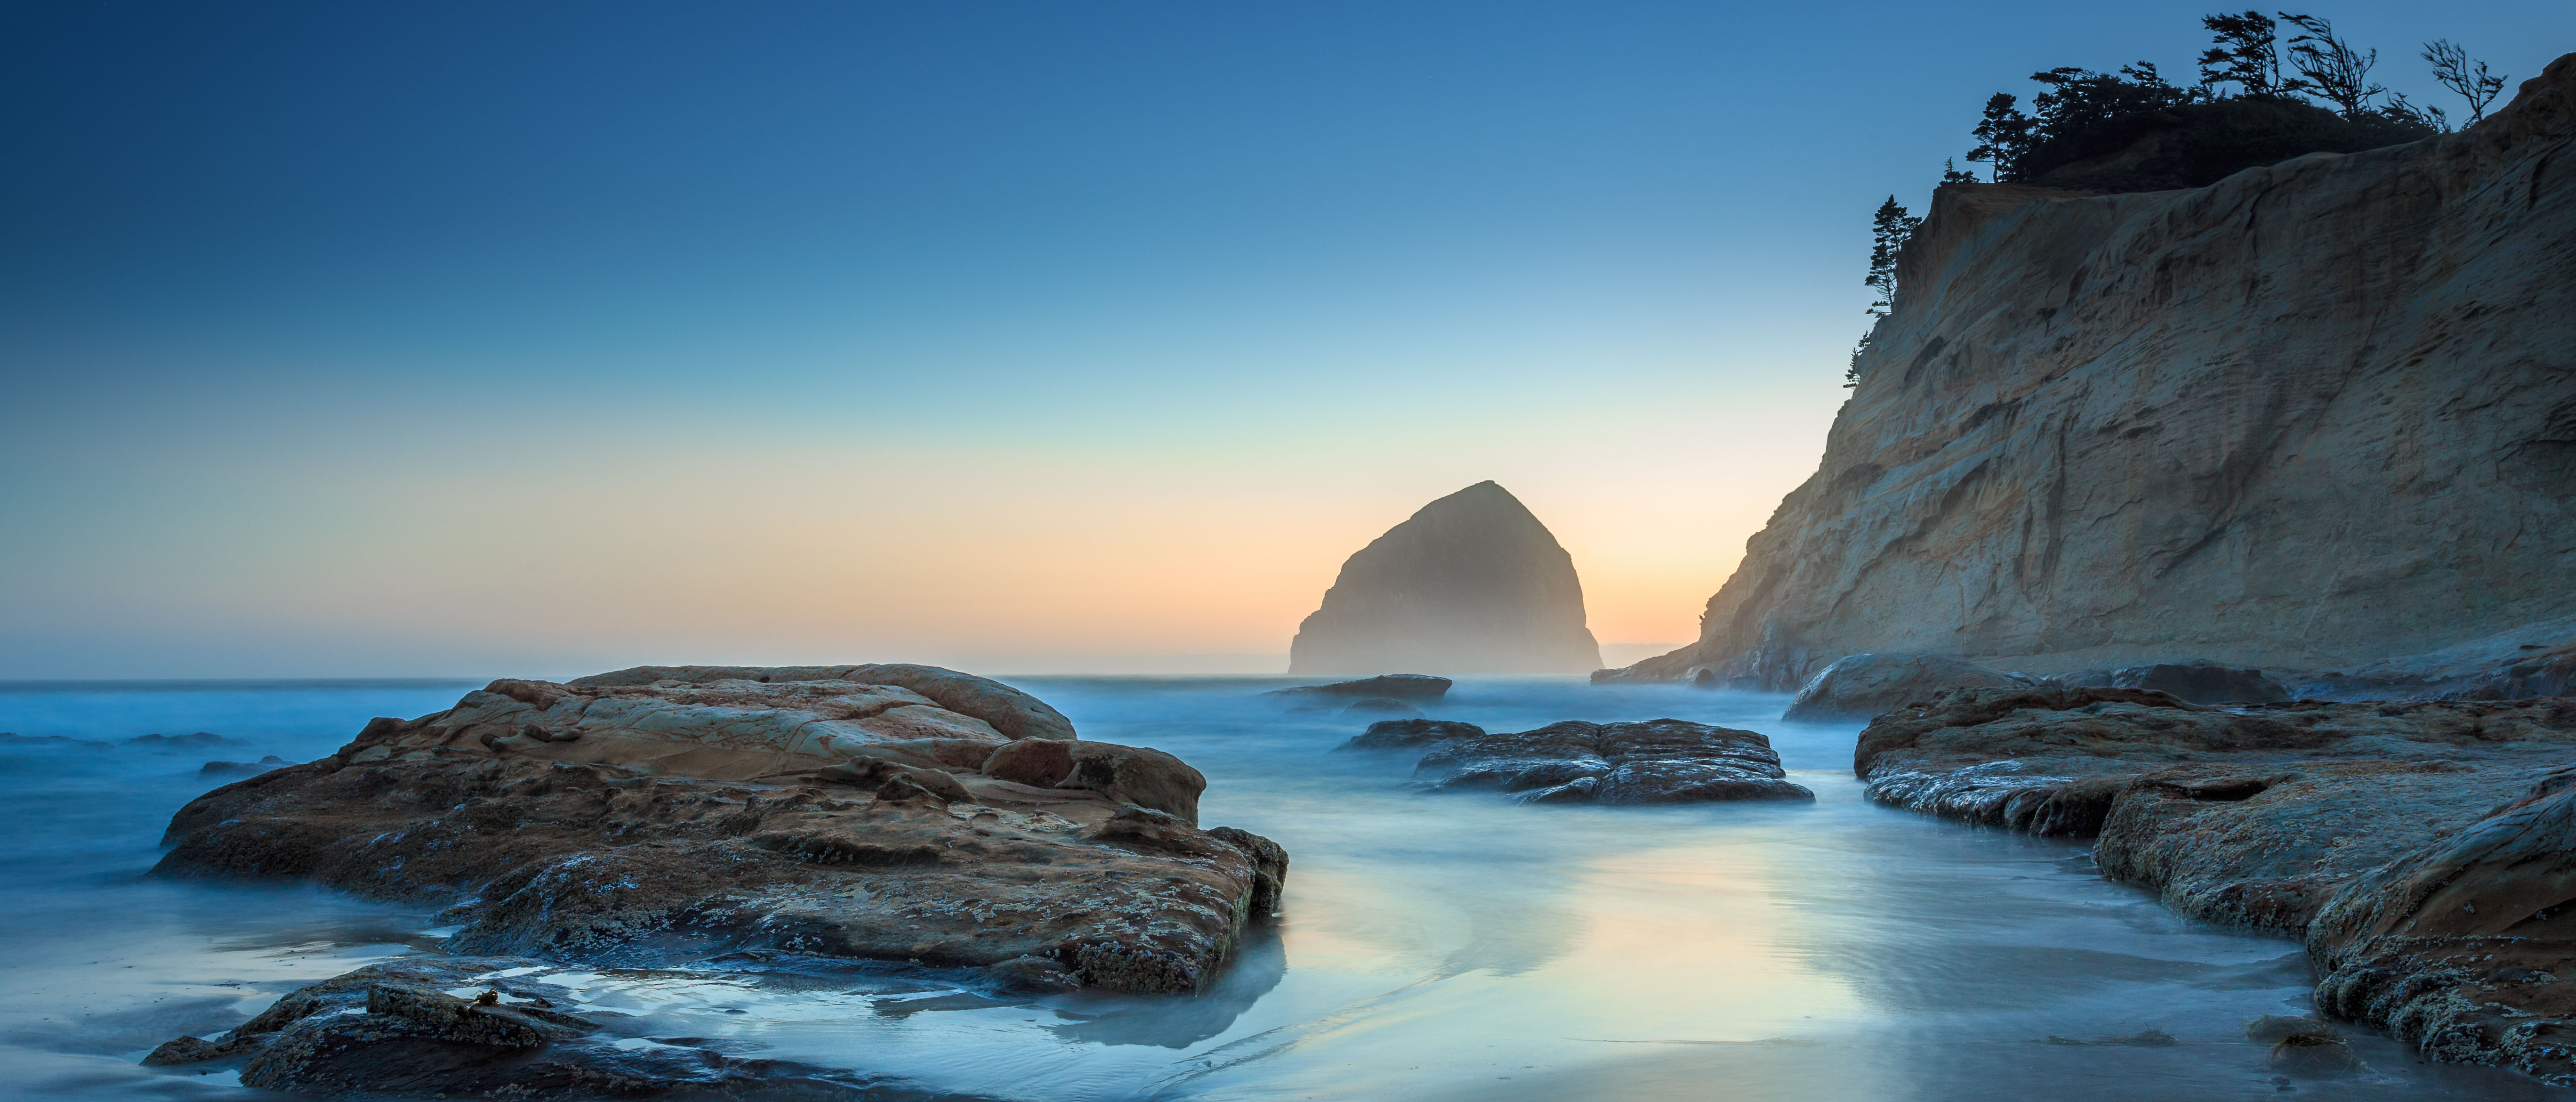 Scenic view of Oregon Coast near Gleneden Beach. Photo from Getty Images.